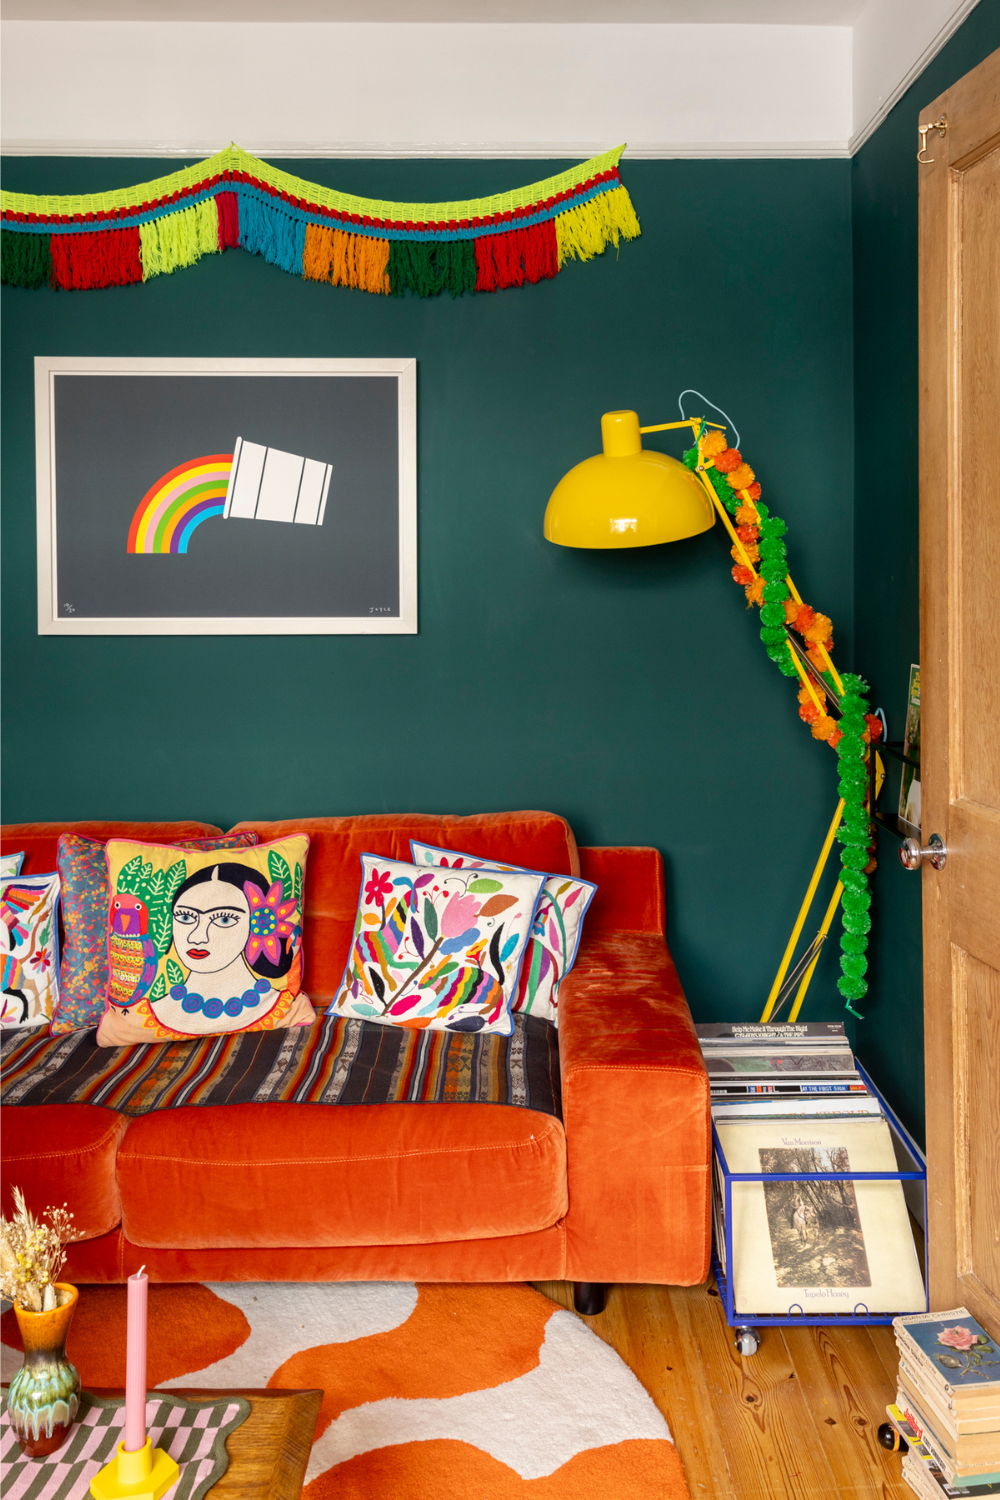 A dark teal living room features an orange velvet couch with vibrant colourful cushions. There is a yellow lamp in the corner and a rainbow print on the wall.